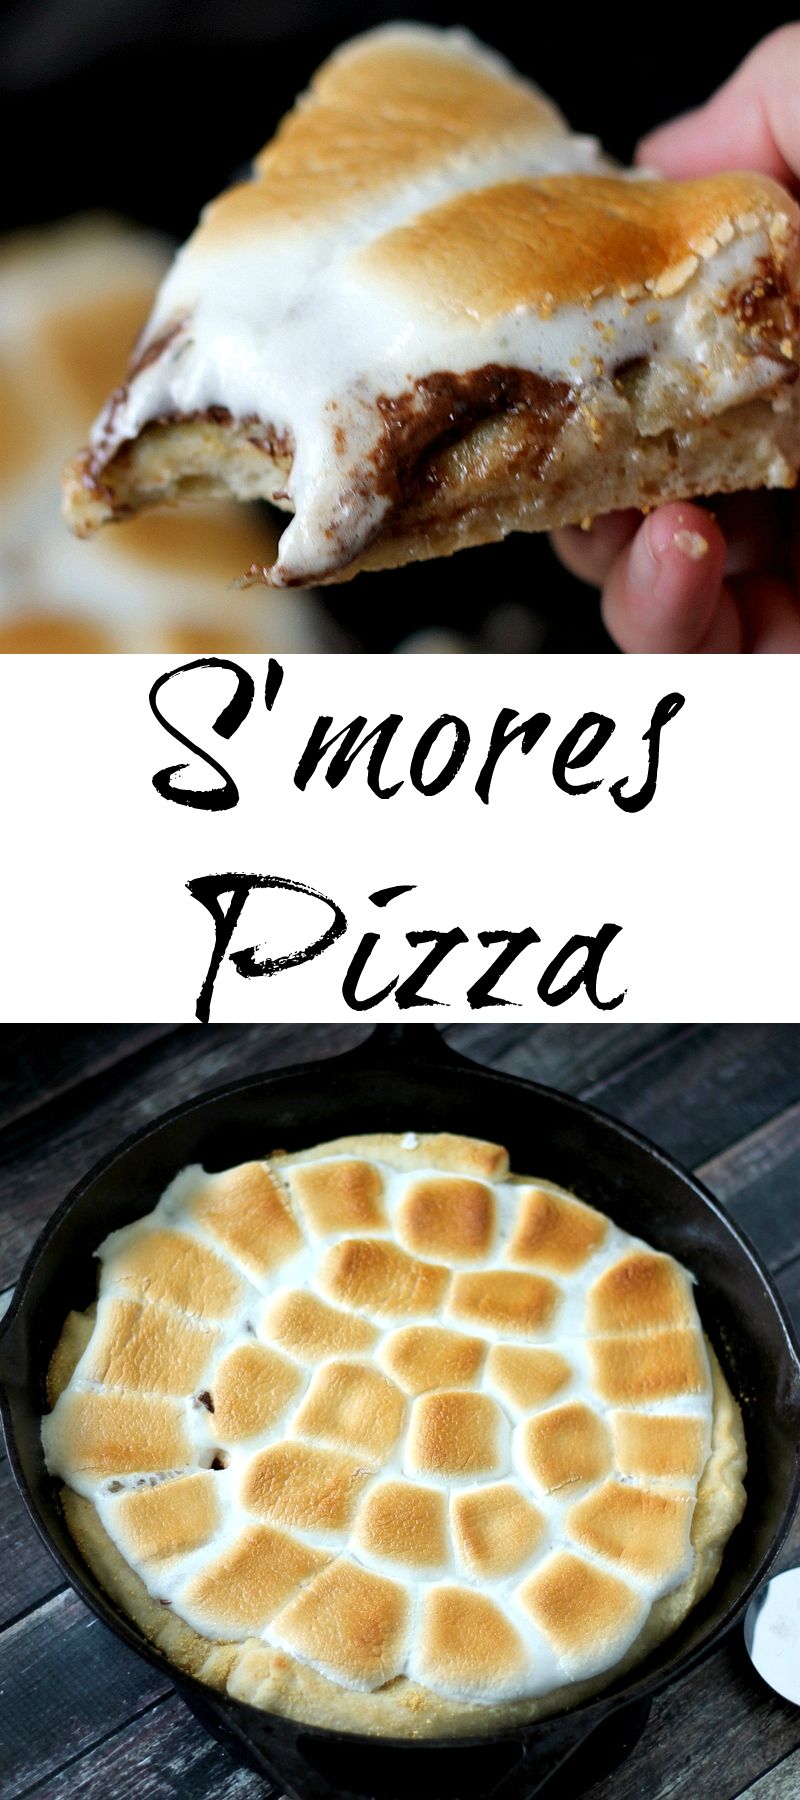 S'mores Pizza is the perfect dessert. It is easy to make and everyone will be begging for a piece!